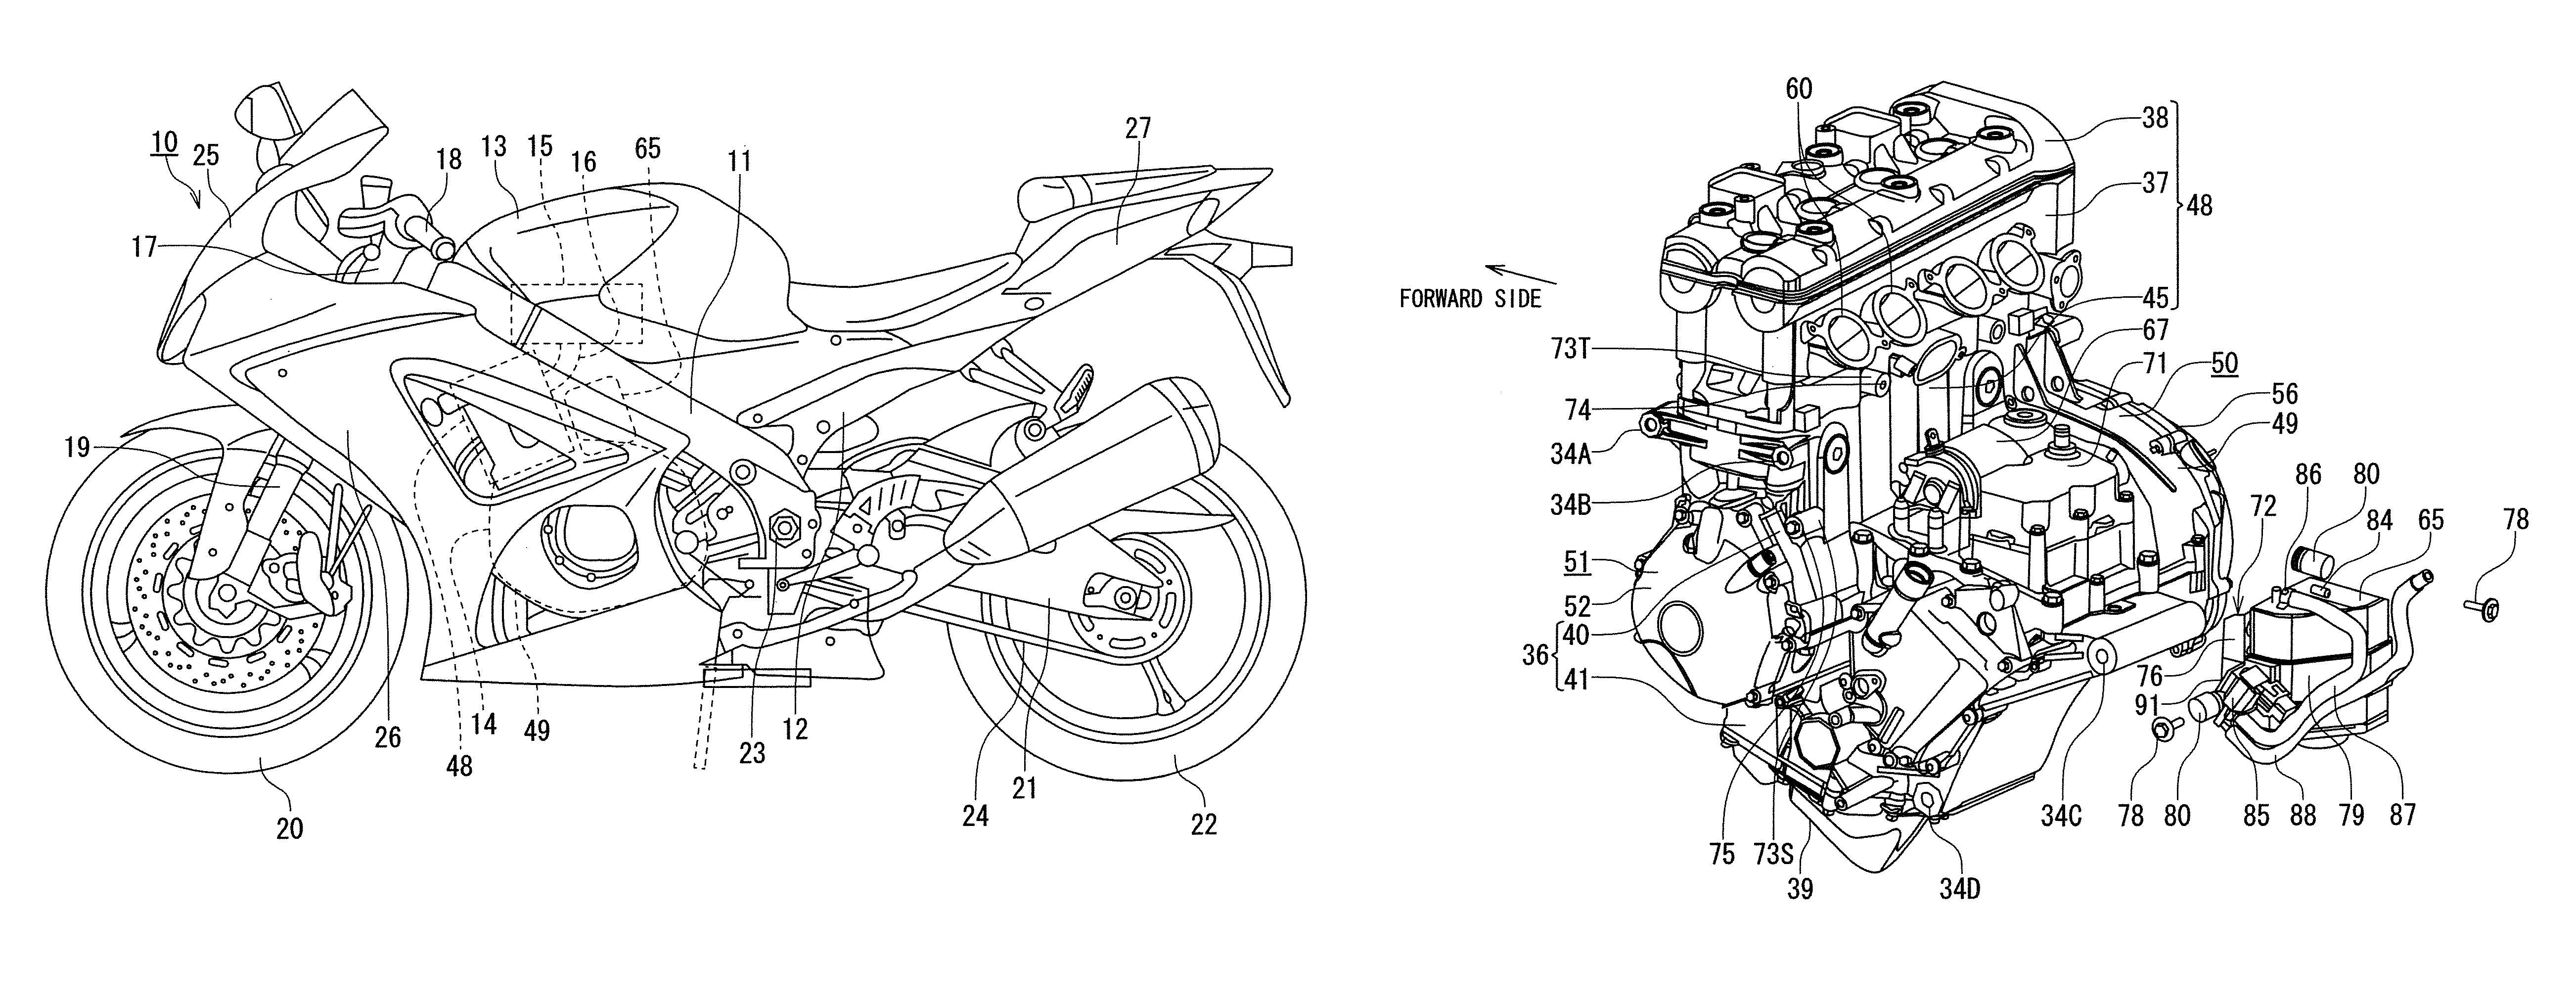 Canister device for motorcycle